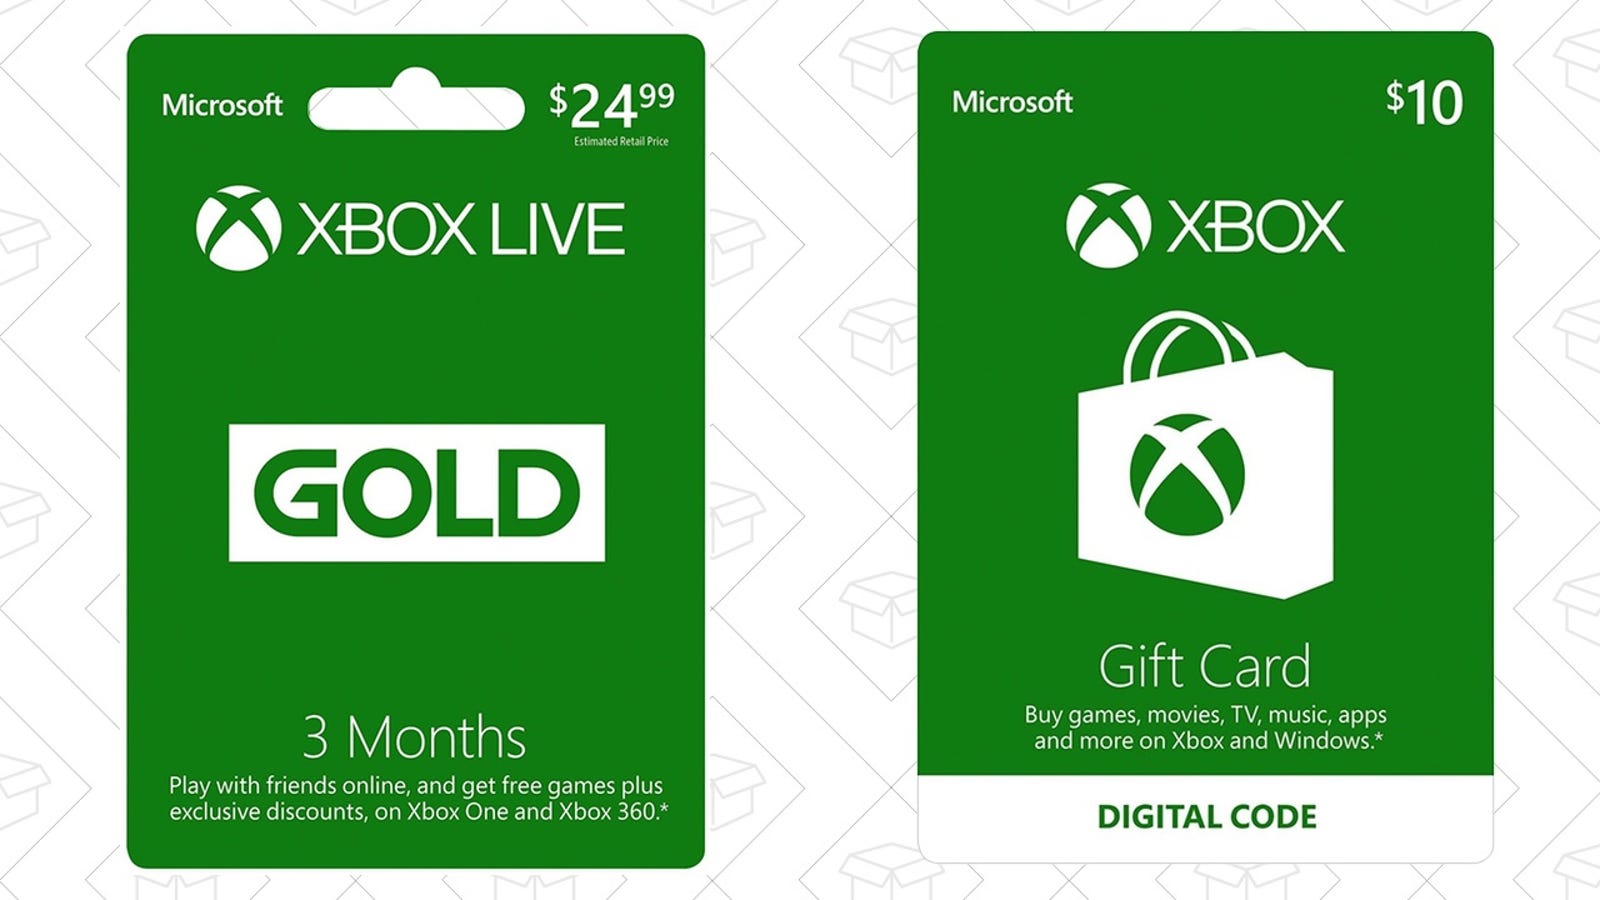 Buy Three Months of Xbox Live Gold, Get a $10 Xbox Gift Card